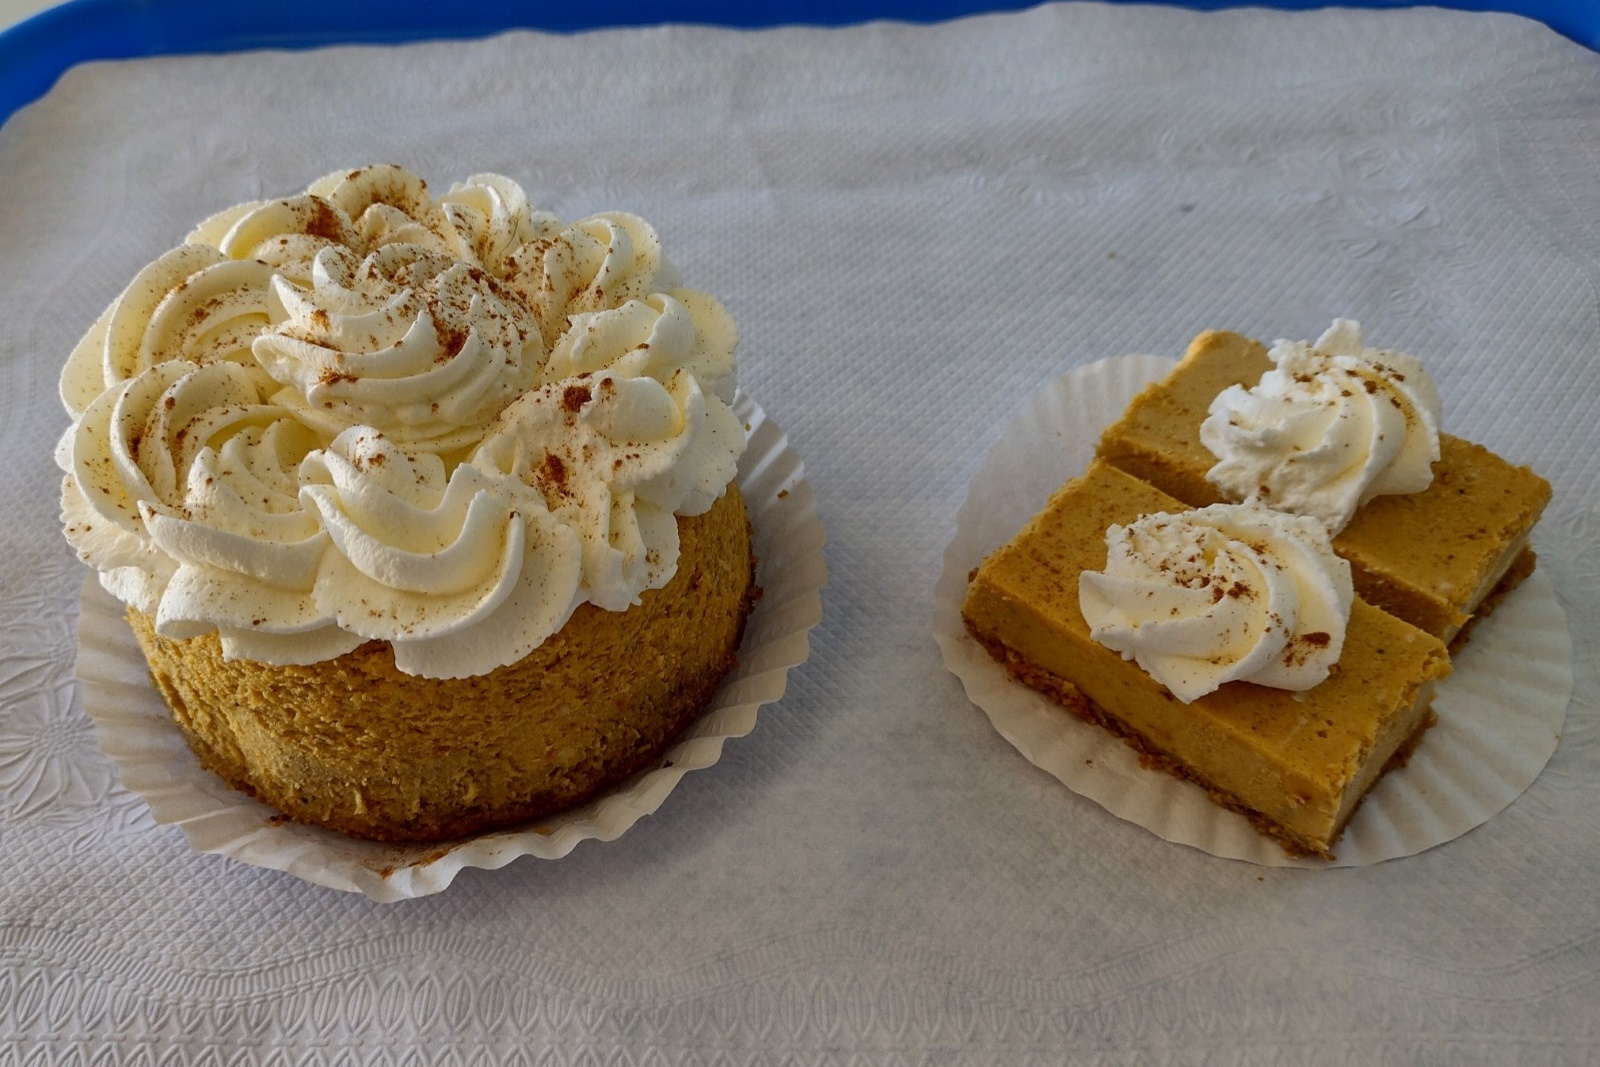 A small pumpkin cheesecake sits on a tray next to two bite-sized pieces